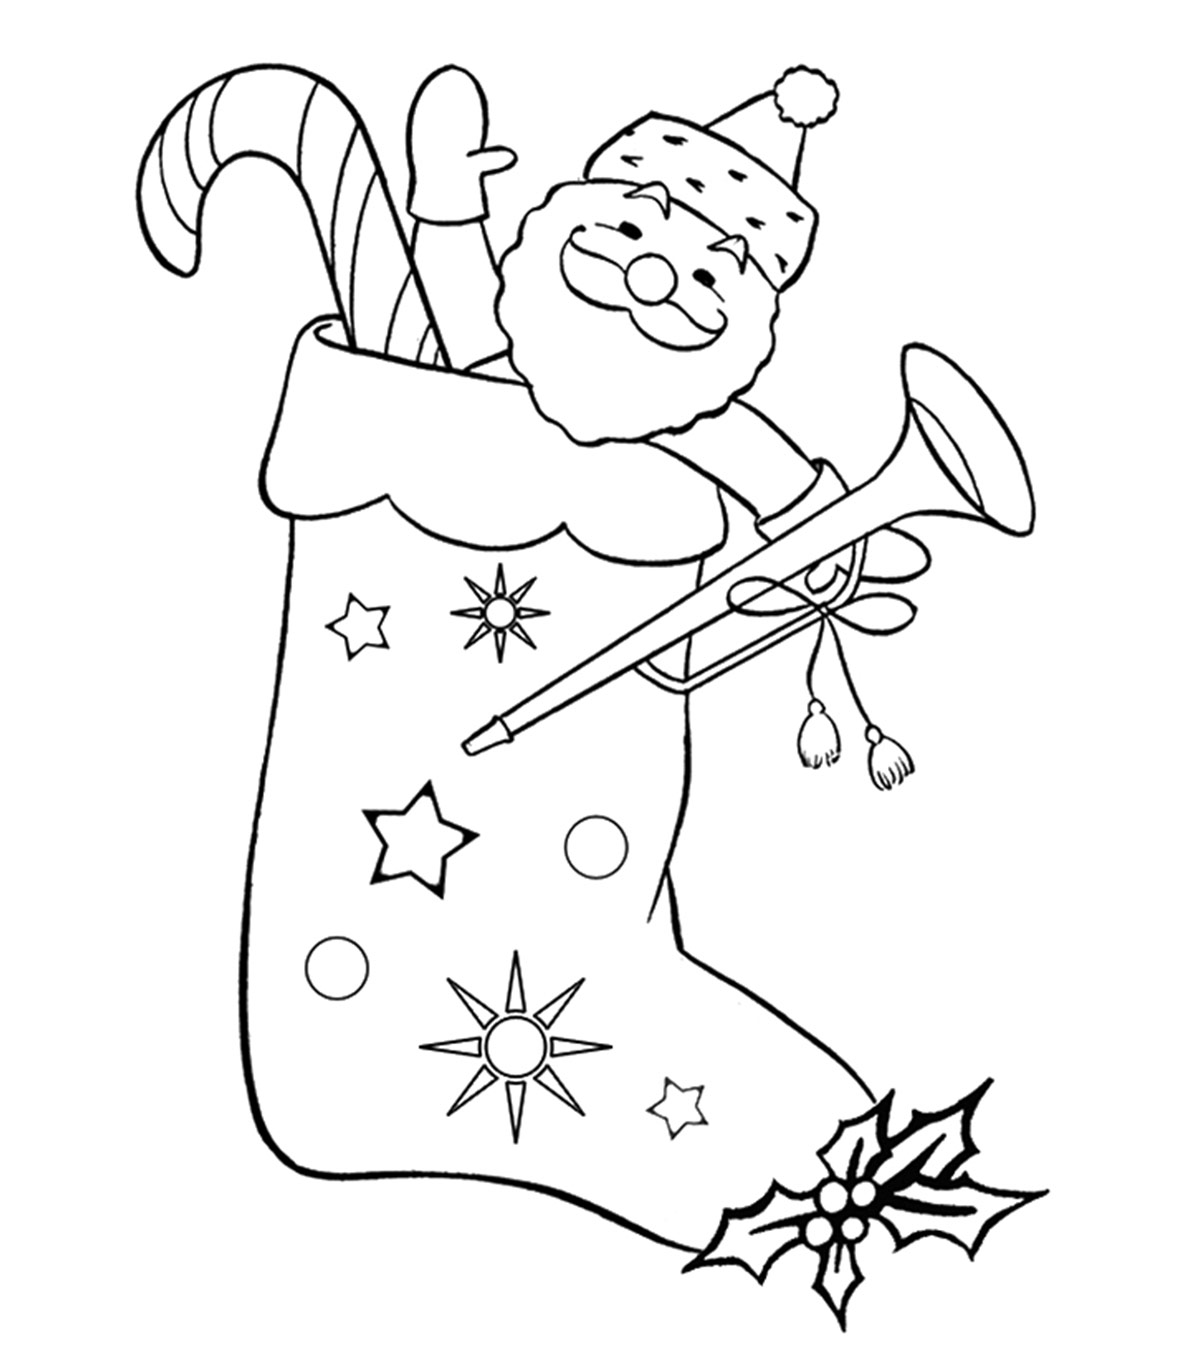 Top 14 Free Printable Christmas Stocking Coloring Pages Online